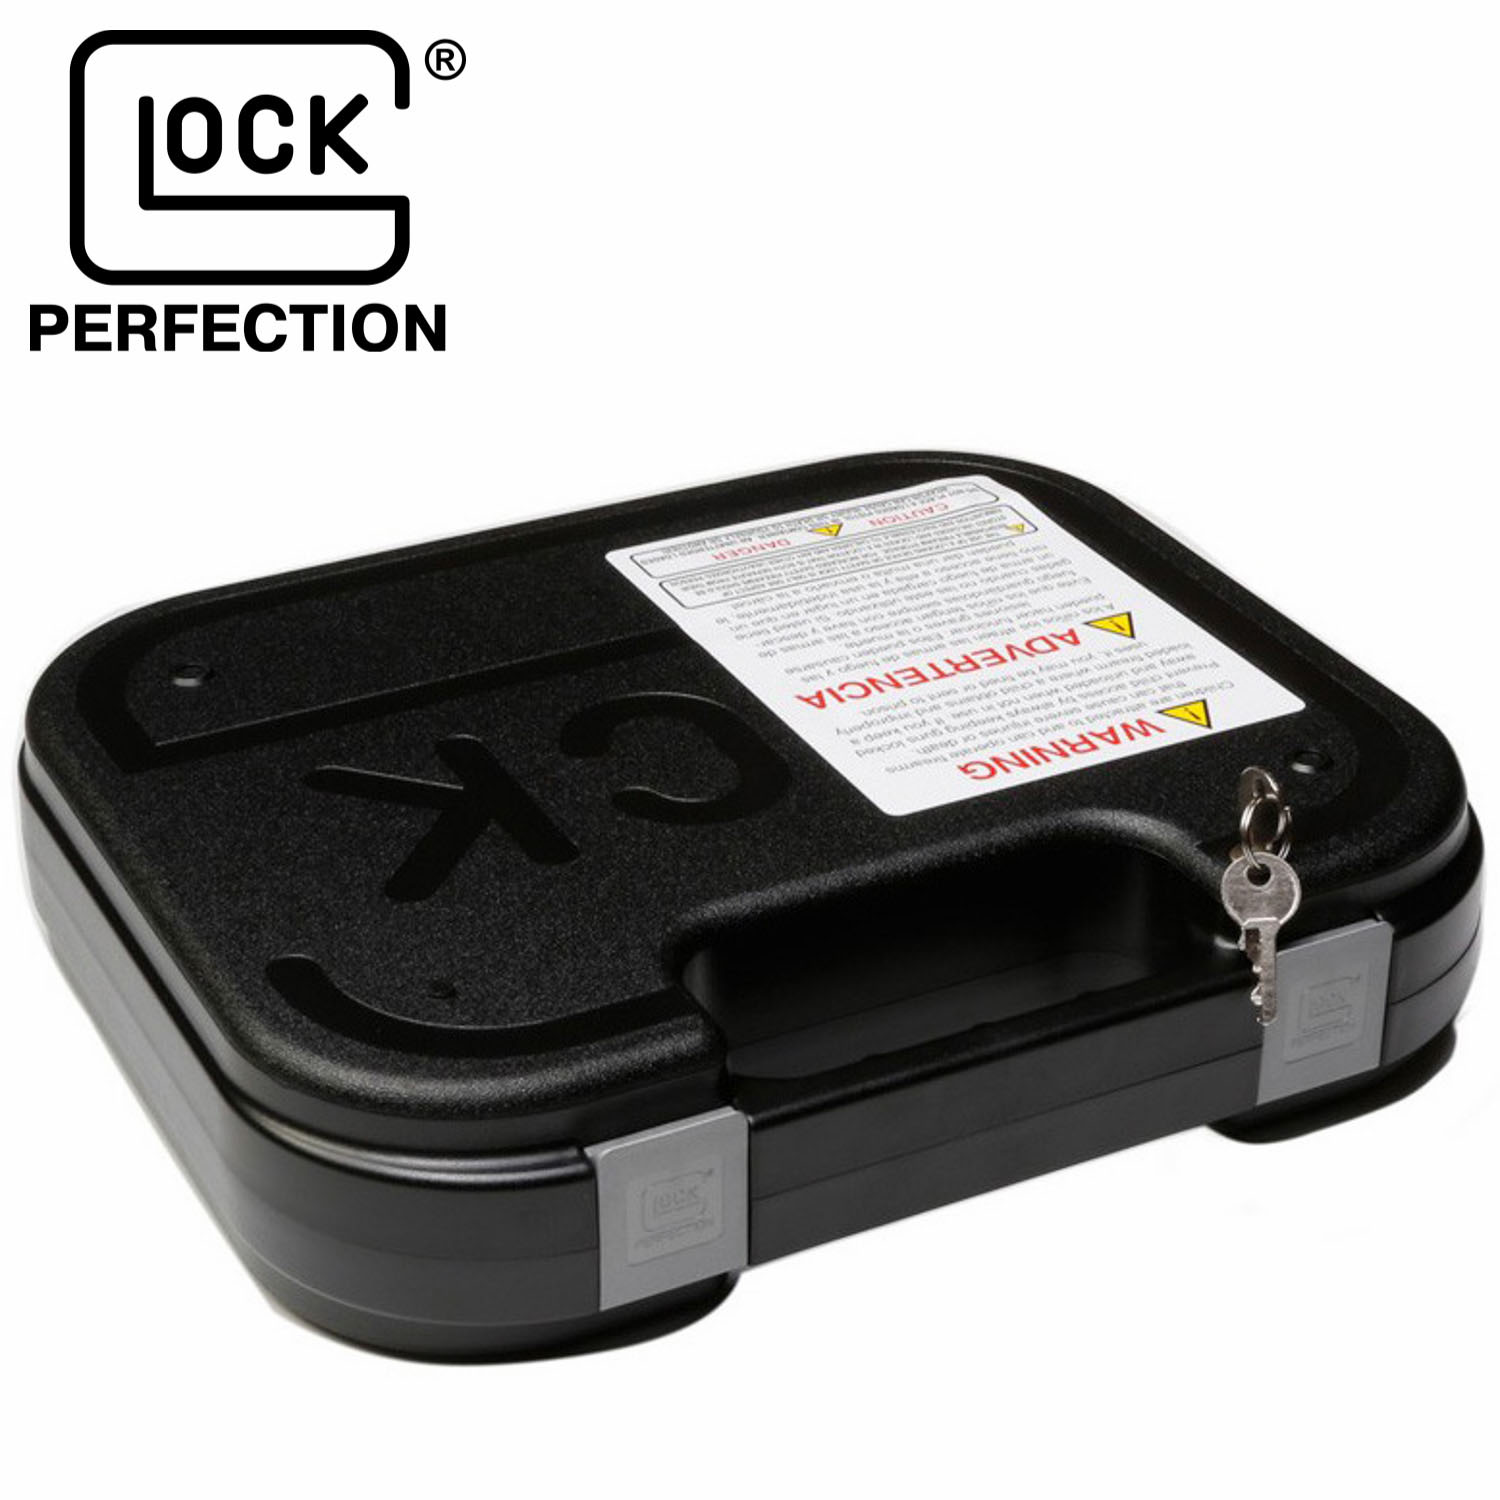 lock NEW Glock Factory Clam Shell Hard Pistol Case with manual brush loader 